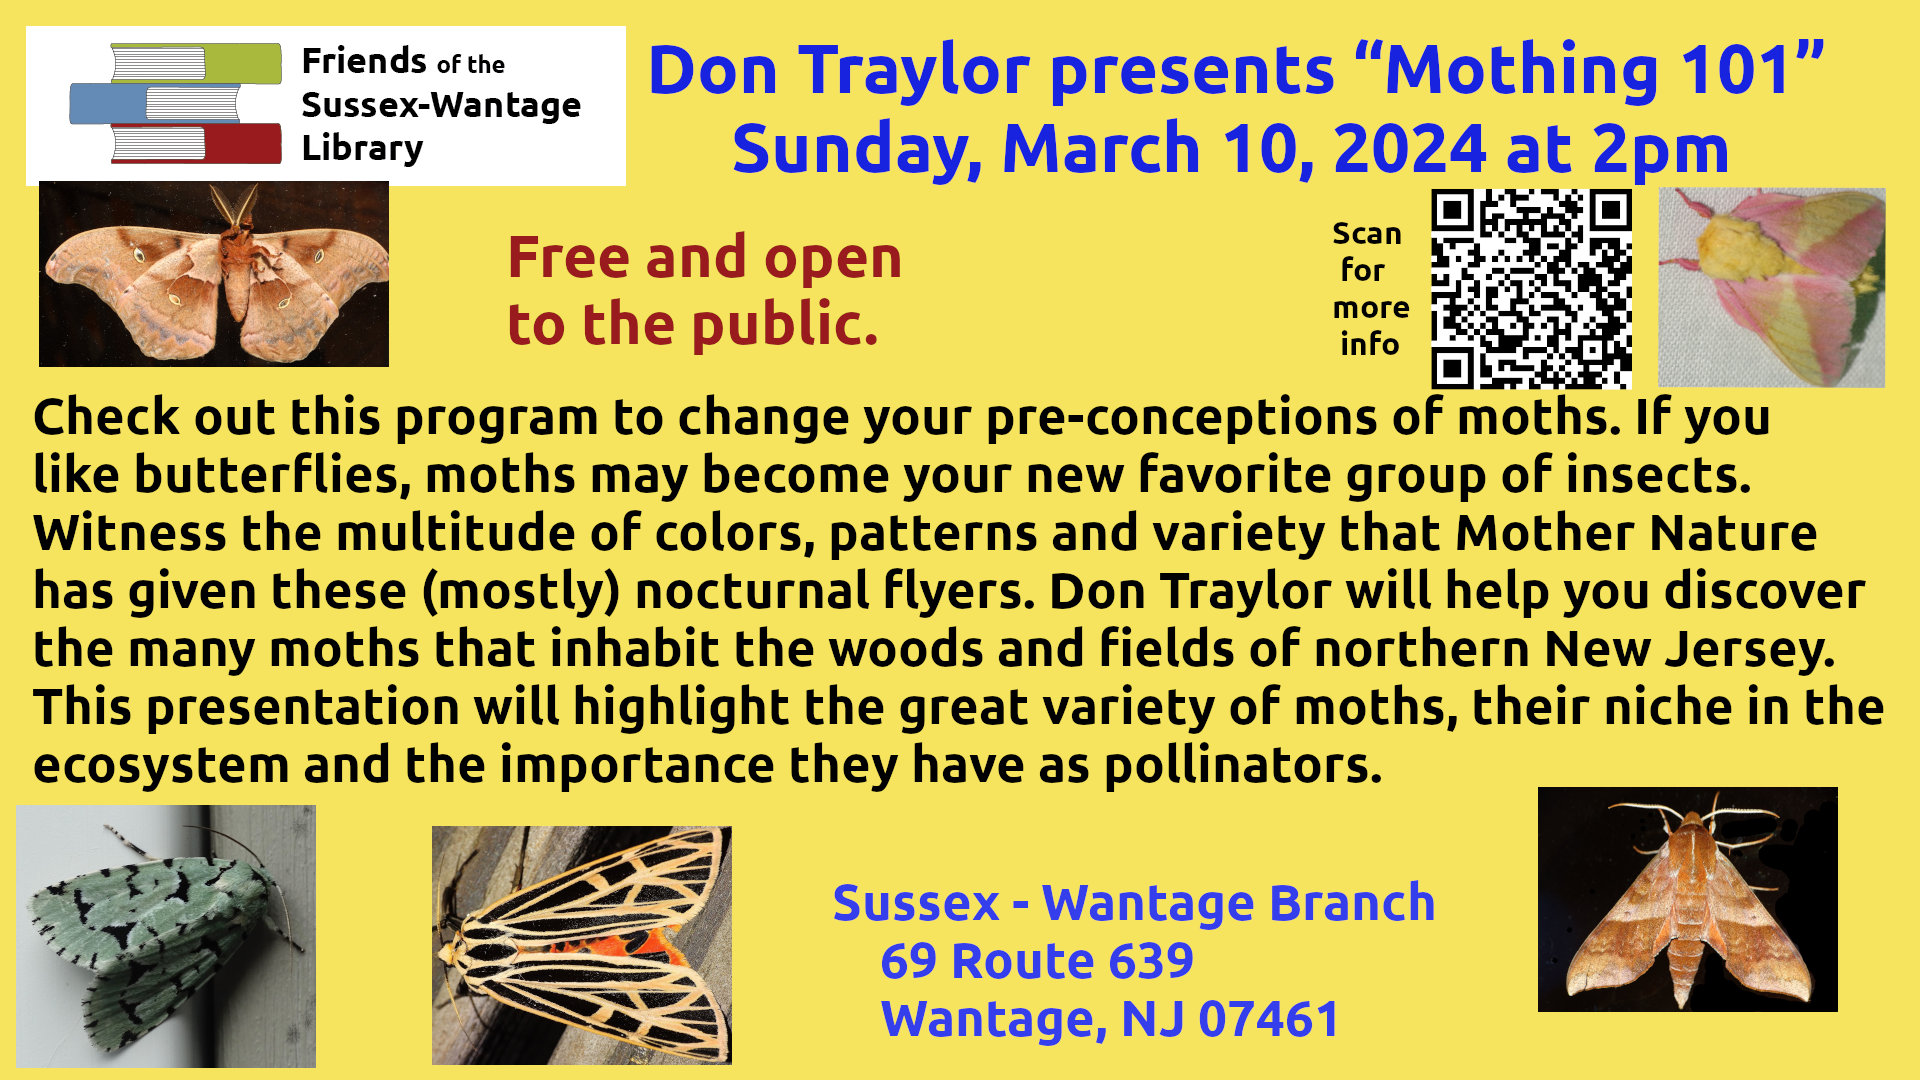 Sussex Wantage Friends of the Library Don Traylor presents “Mothing 101” Sunday, March 10, 2024 at 2pm Check out this program to change your pre-conceptions of moths. If you like butterflies, moths may become your new favorite group of insects. Witness the multitude of colors, patterns and variety that Mother Nature has given these (mostly) nocturnal flyers. Don Traylor will help you discover the many moths that inhabit the woods and fields of northern New Jersey. This presentation will highlight the great variety of moths, their niche in the ecosystem and the importance they have as pollinators.